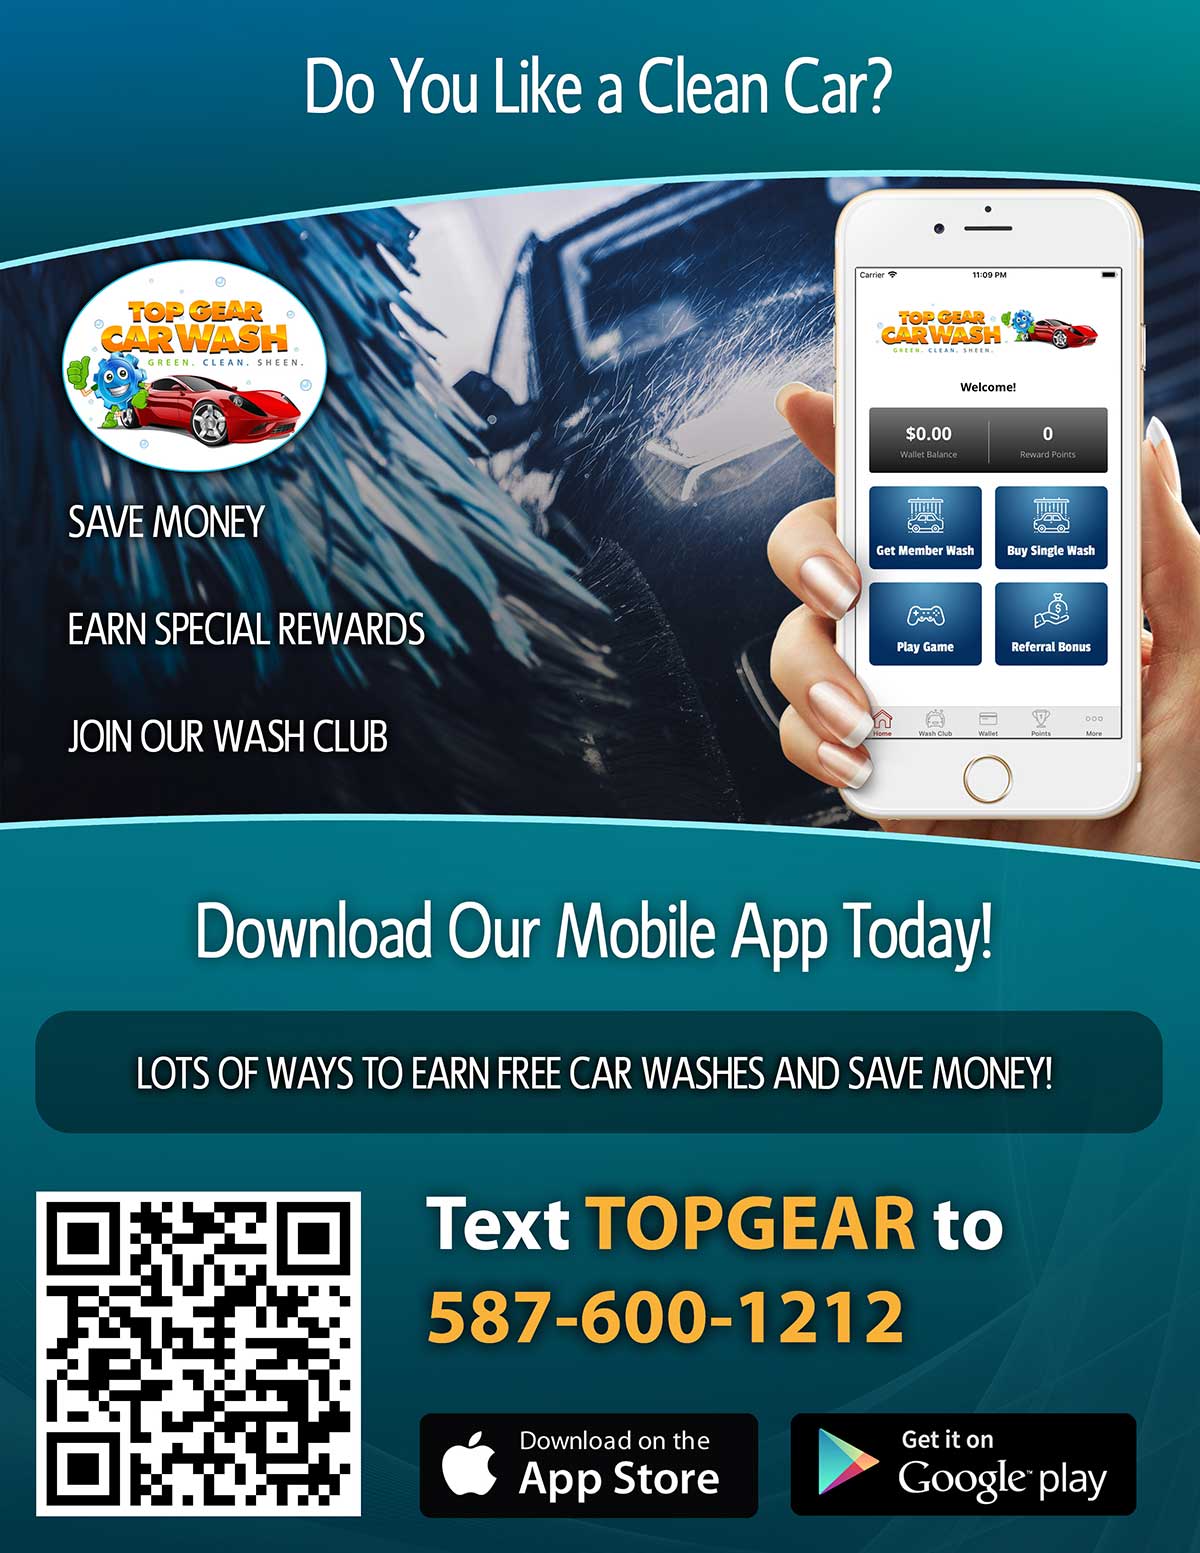 Download Our Mobile App Today!